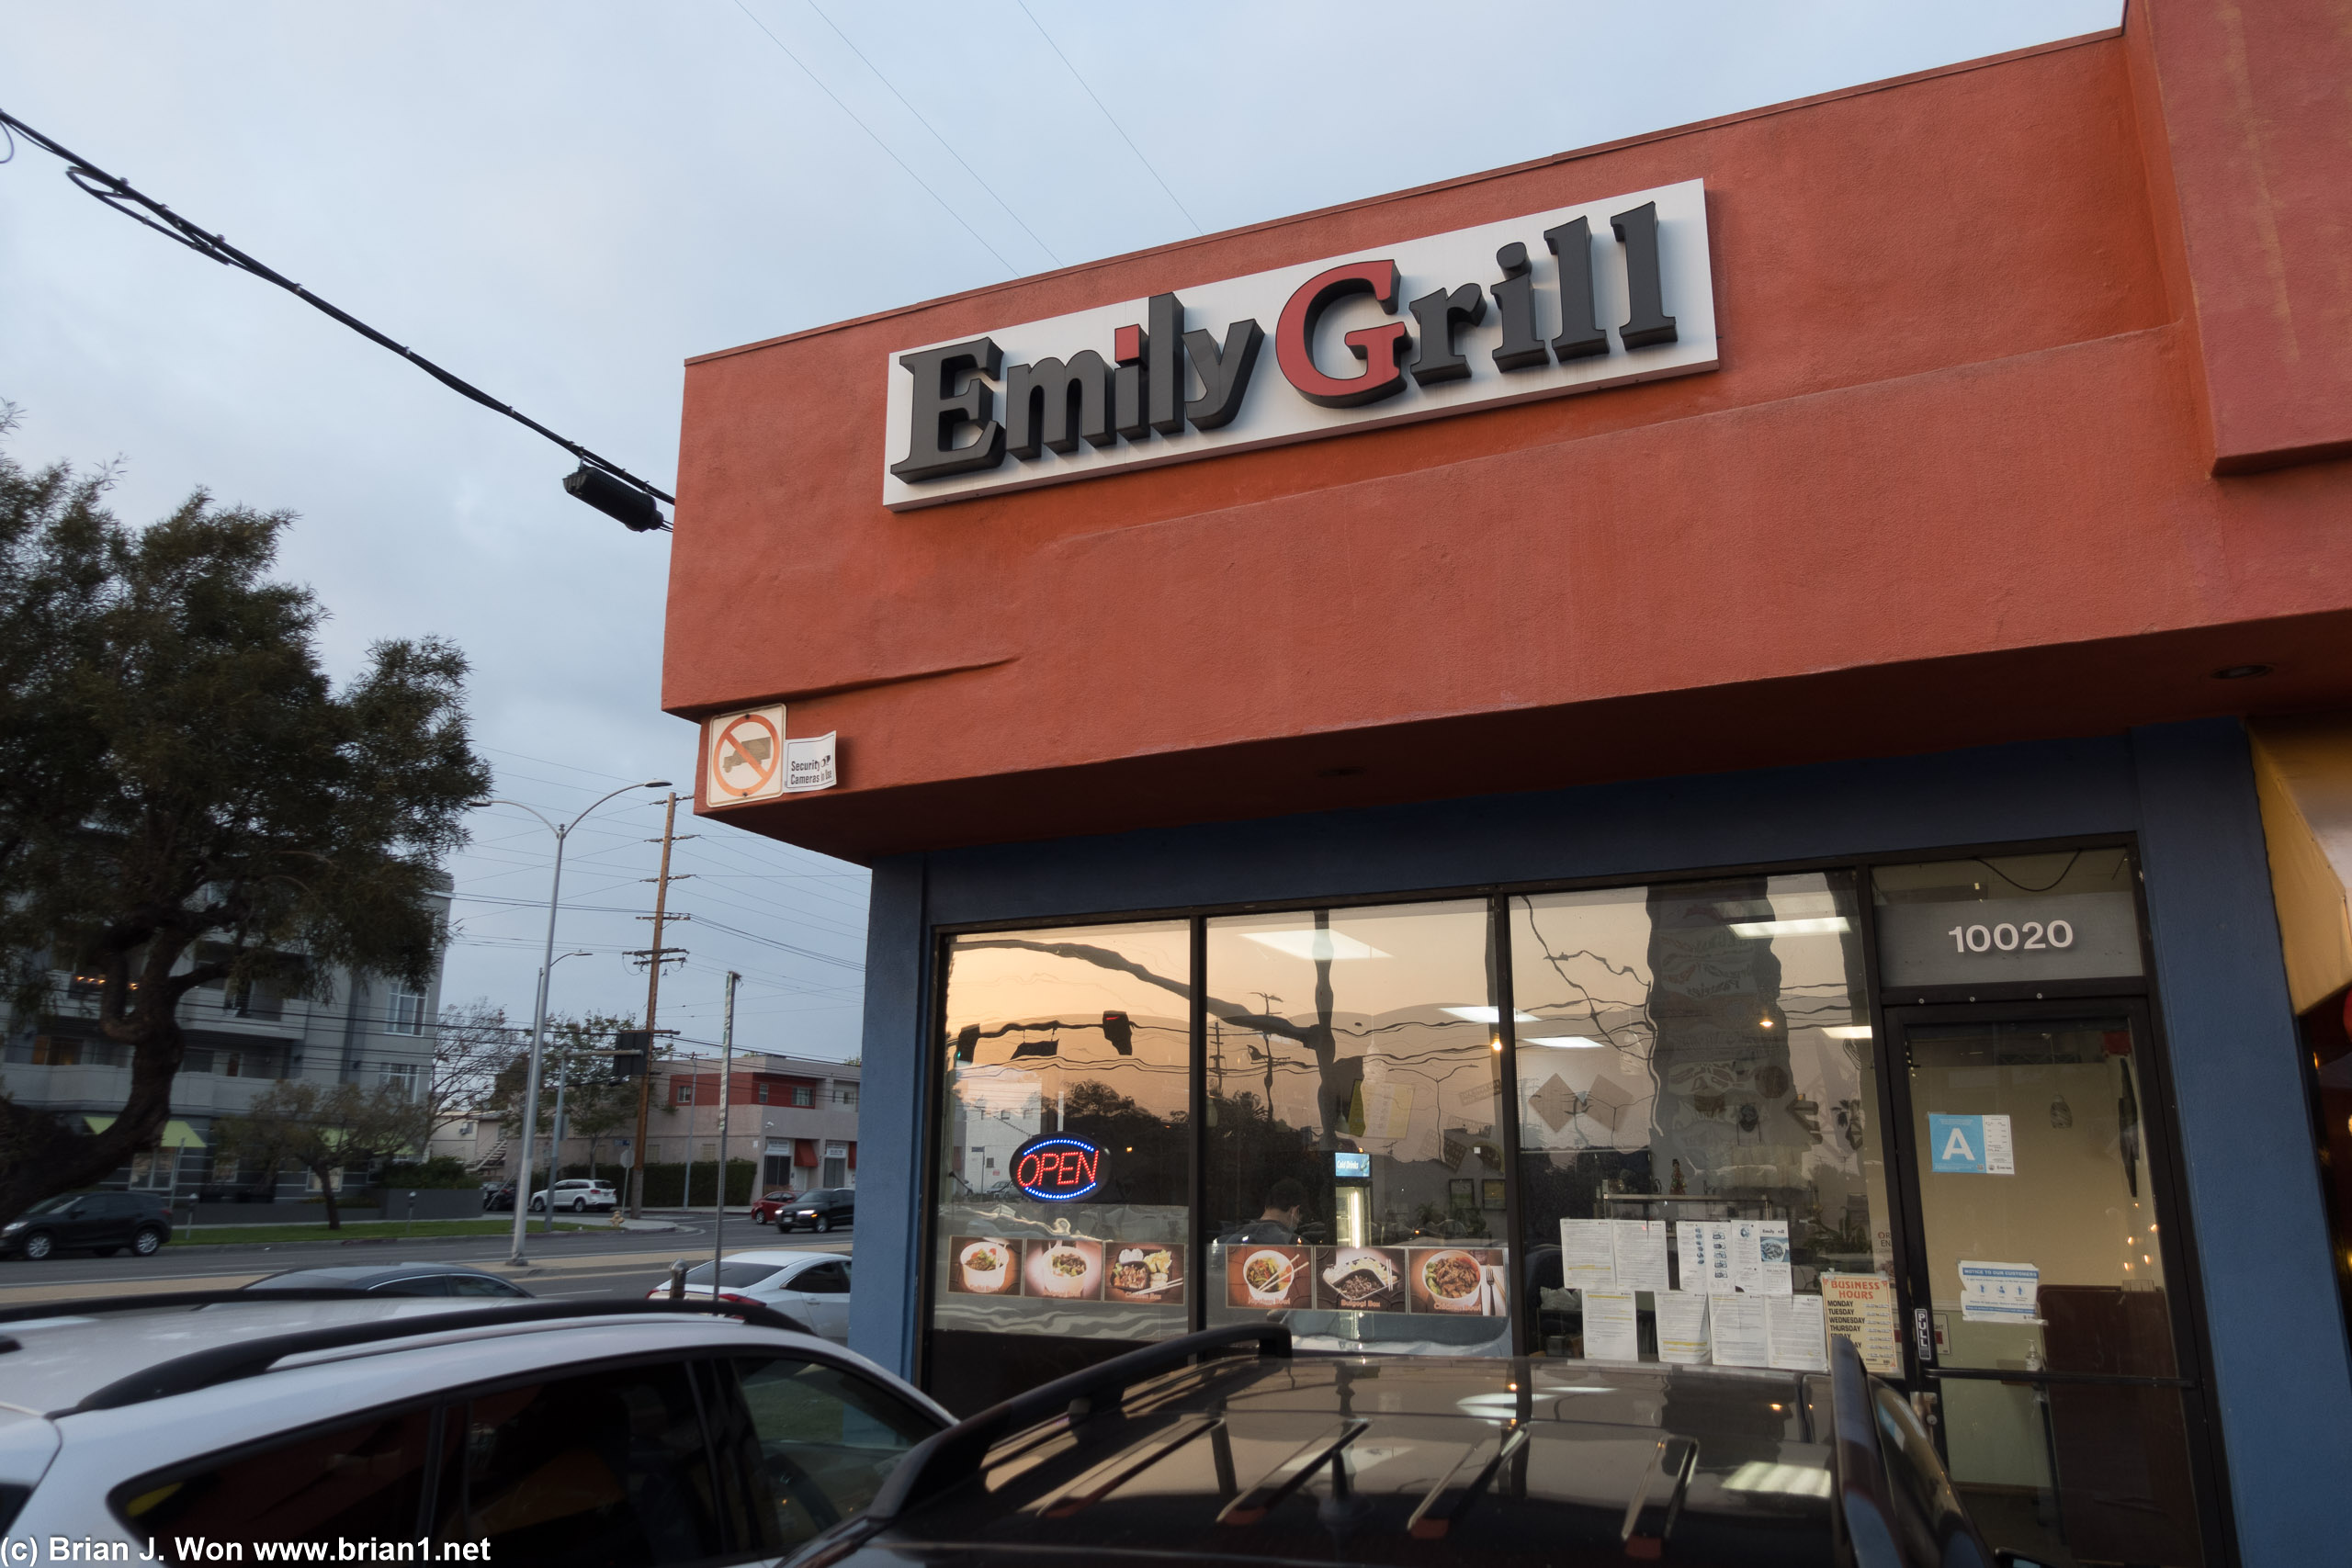 Emily Grill in Culver City.